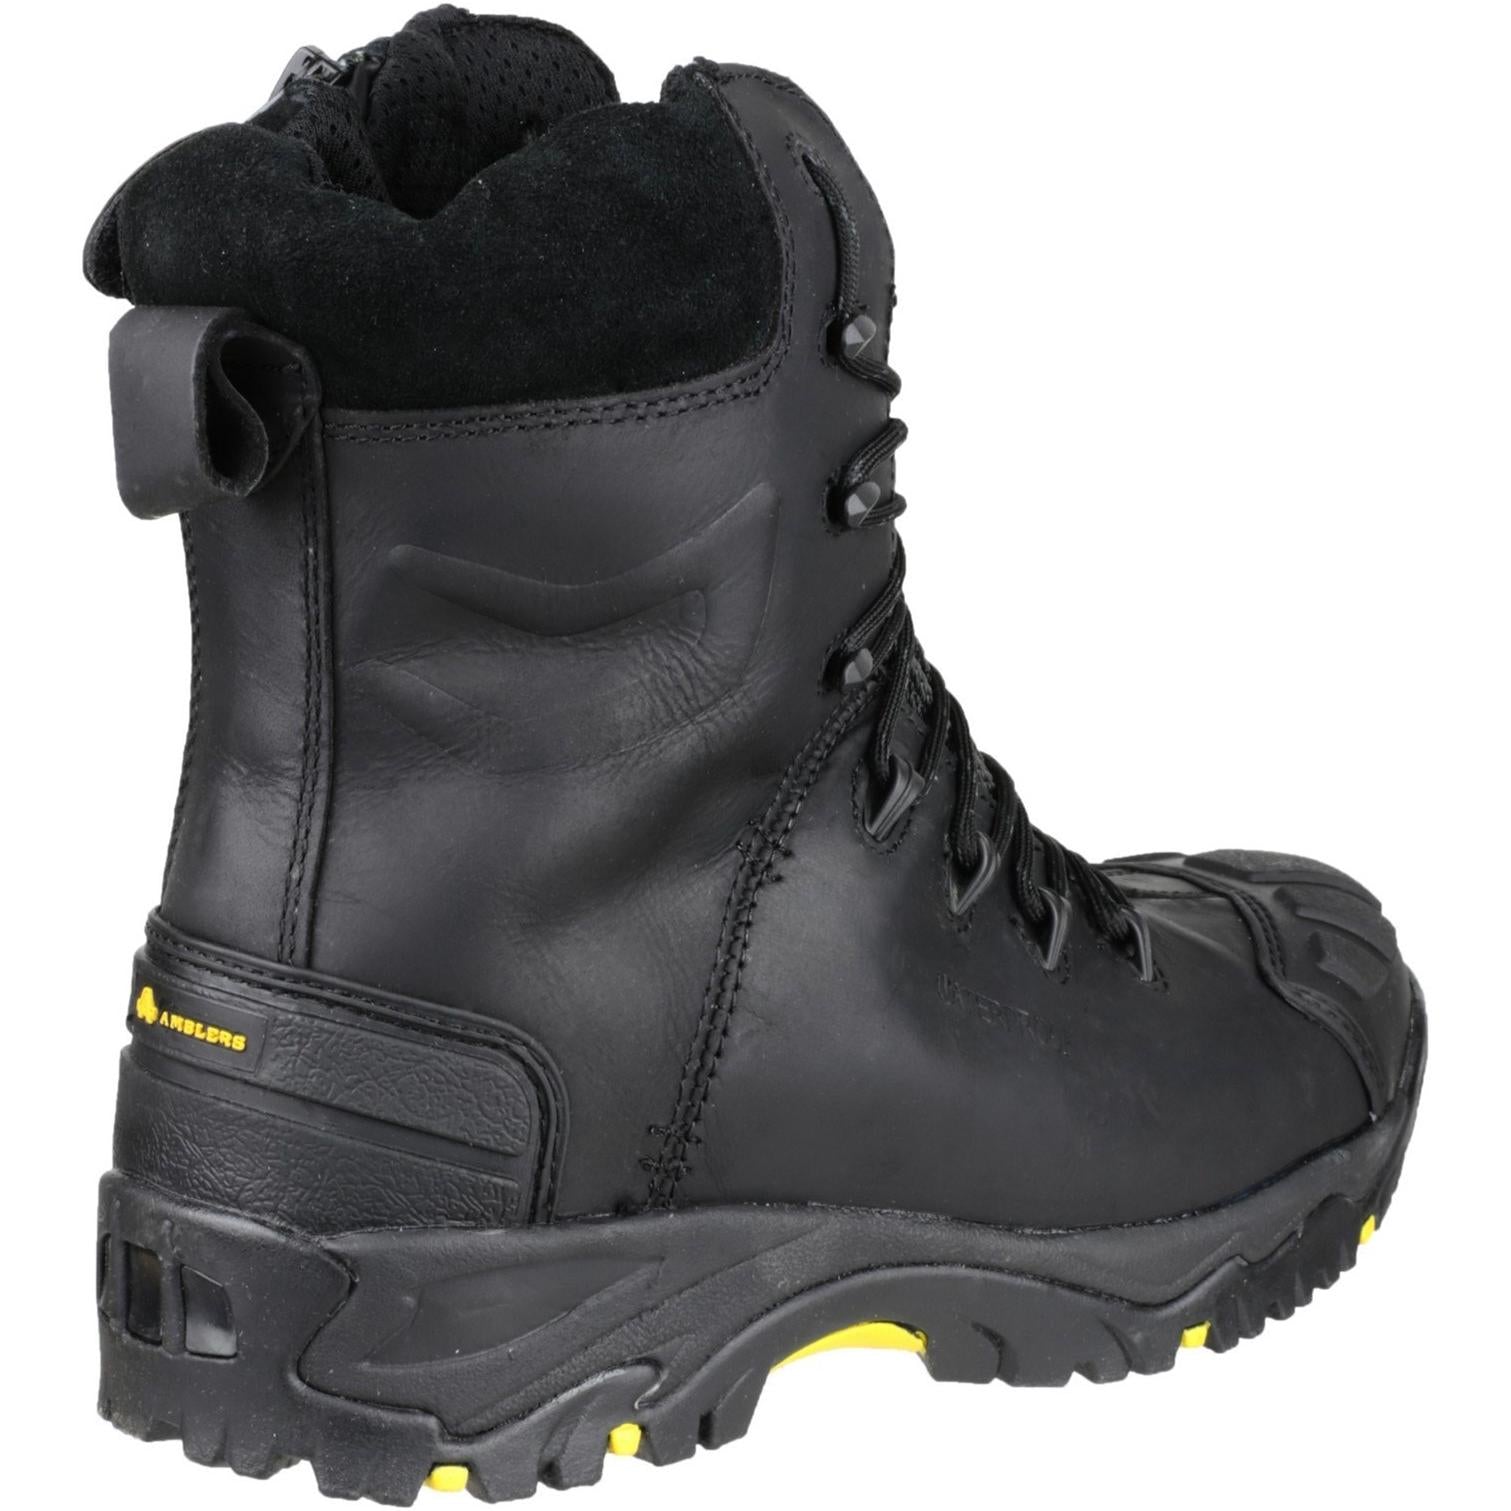 Amblers Safety FS999 Hi Leg Composite Safety Boot With Side Zip